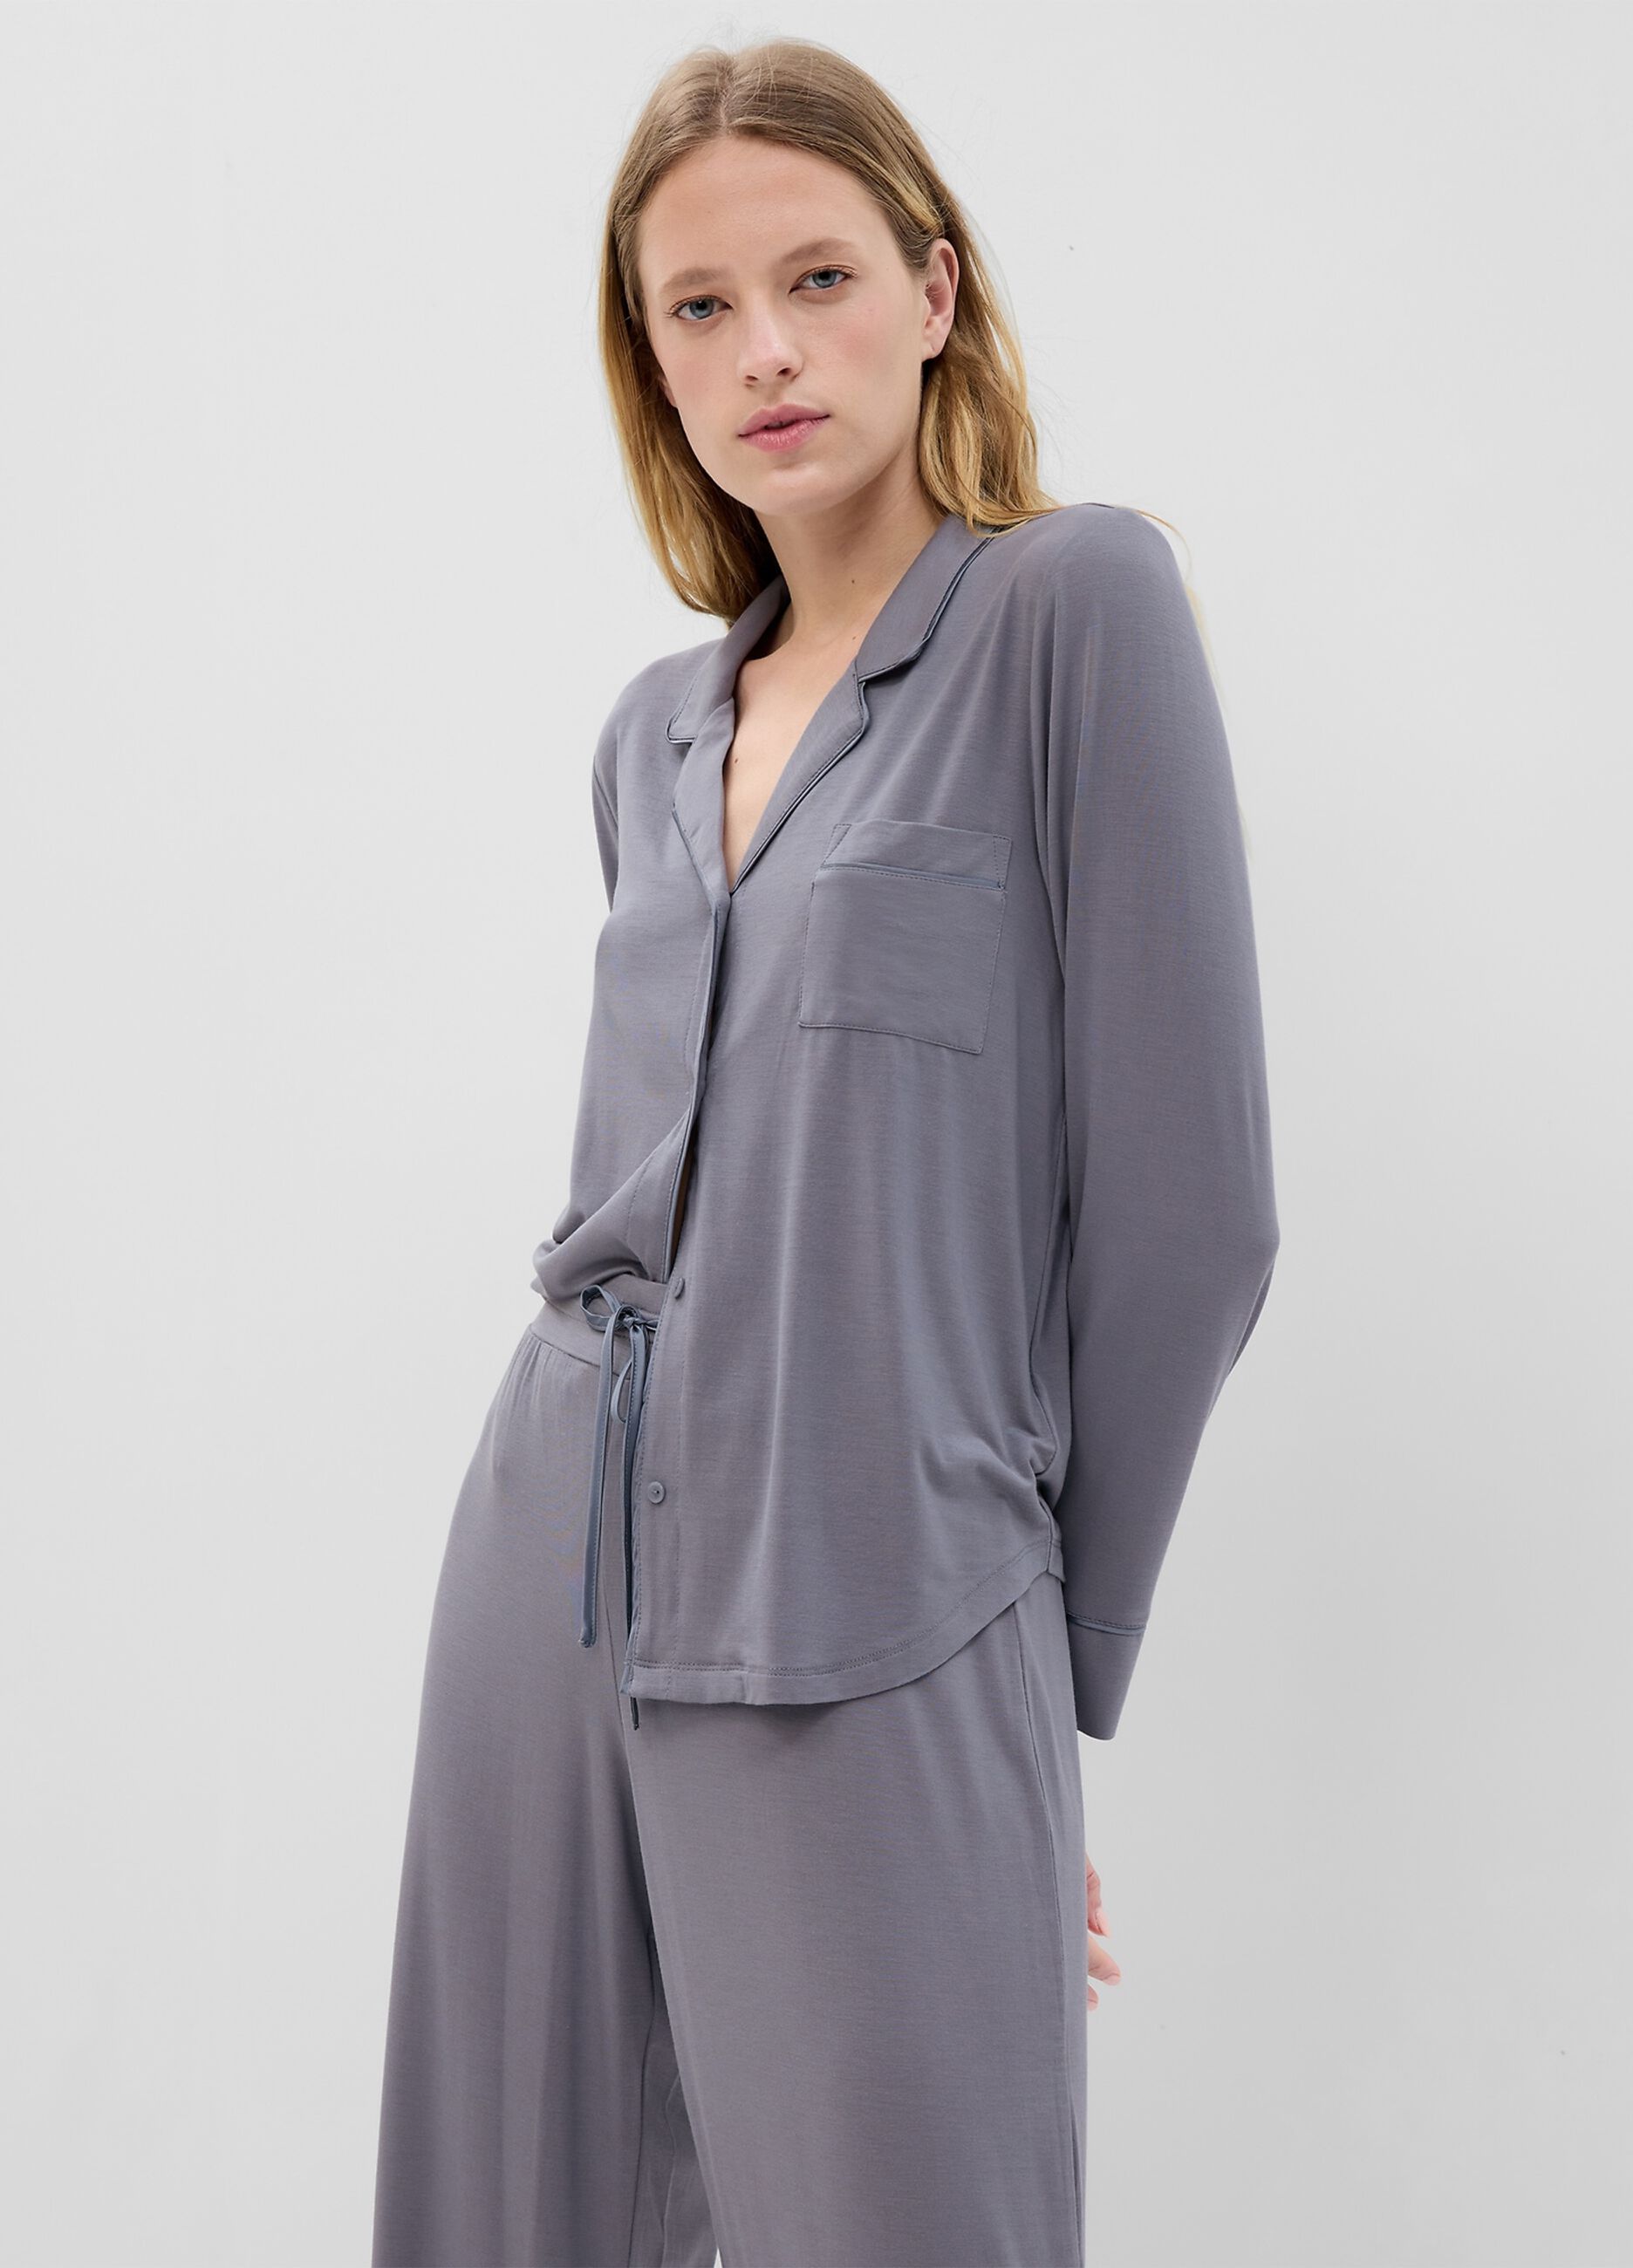 Pyjama top with contrasting piping